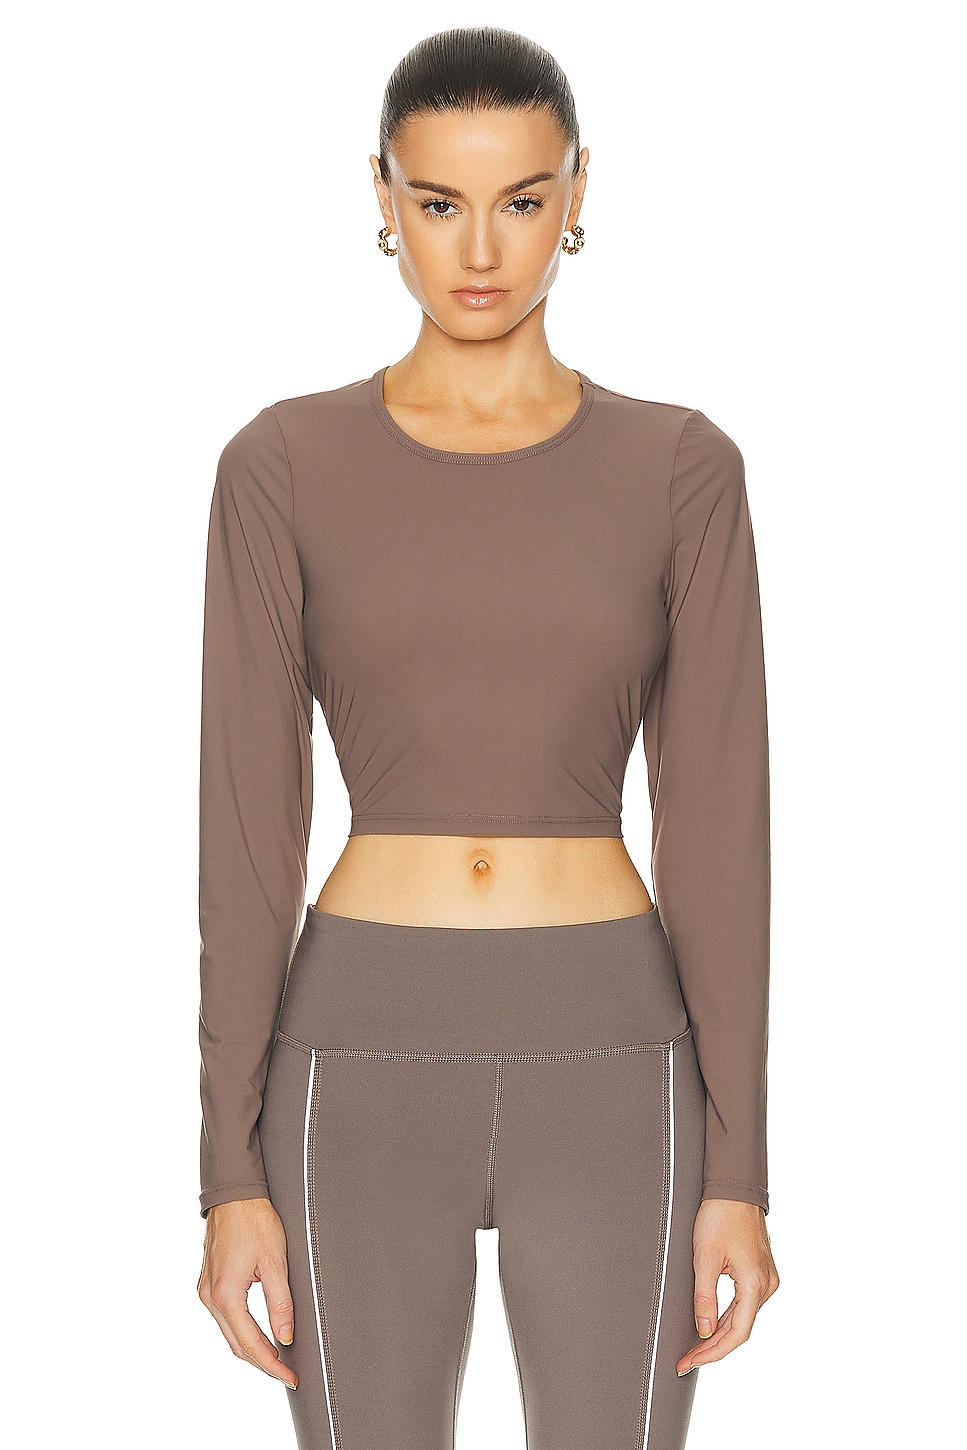 Beyond Yoga Power Beyond Lite Cardio Cropped Pullover Top in Taupe